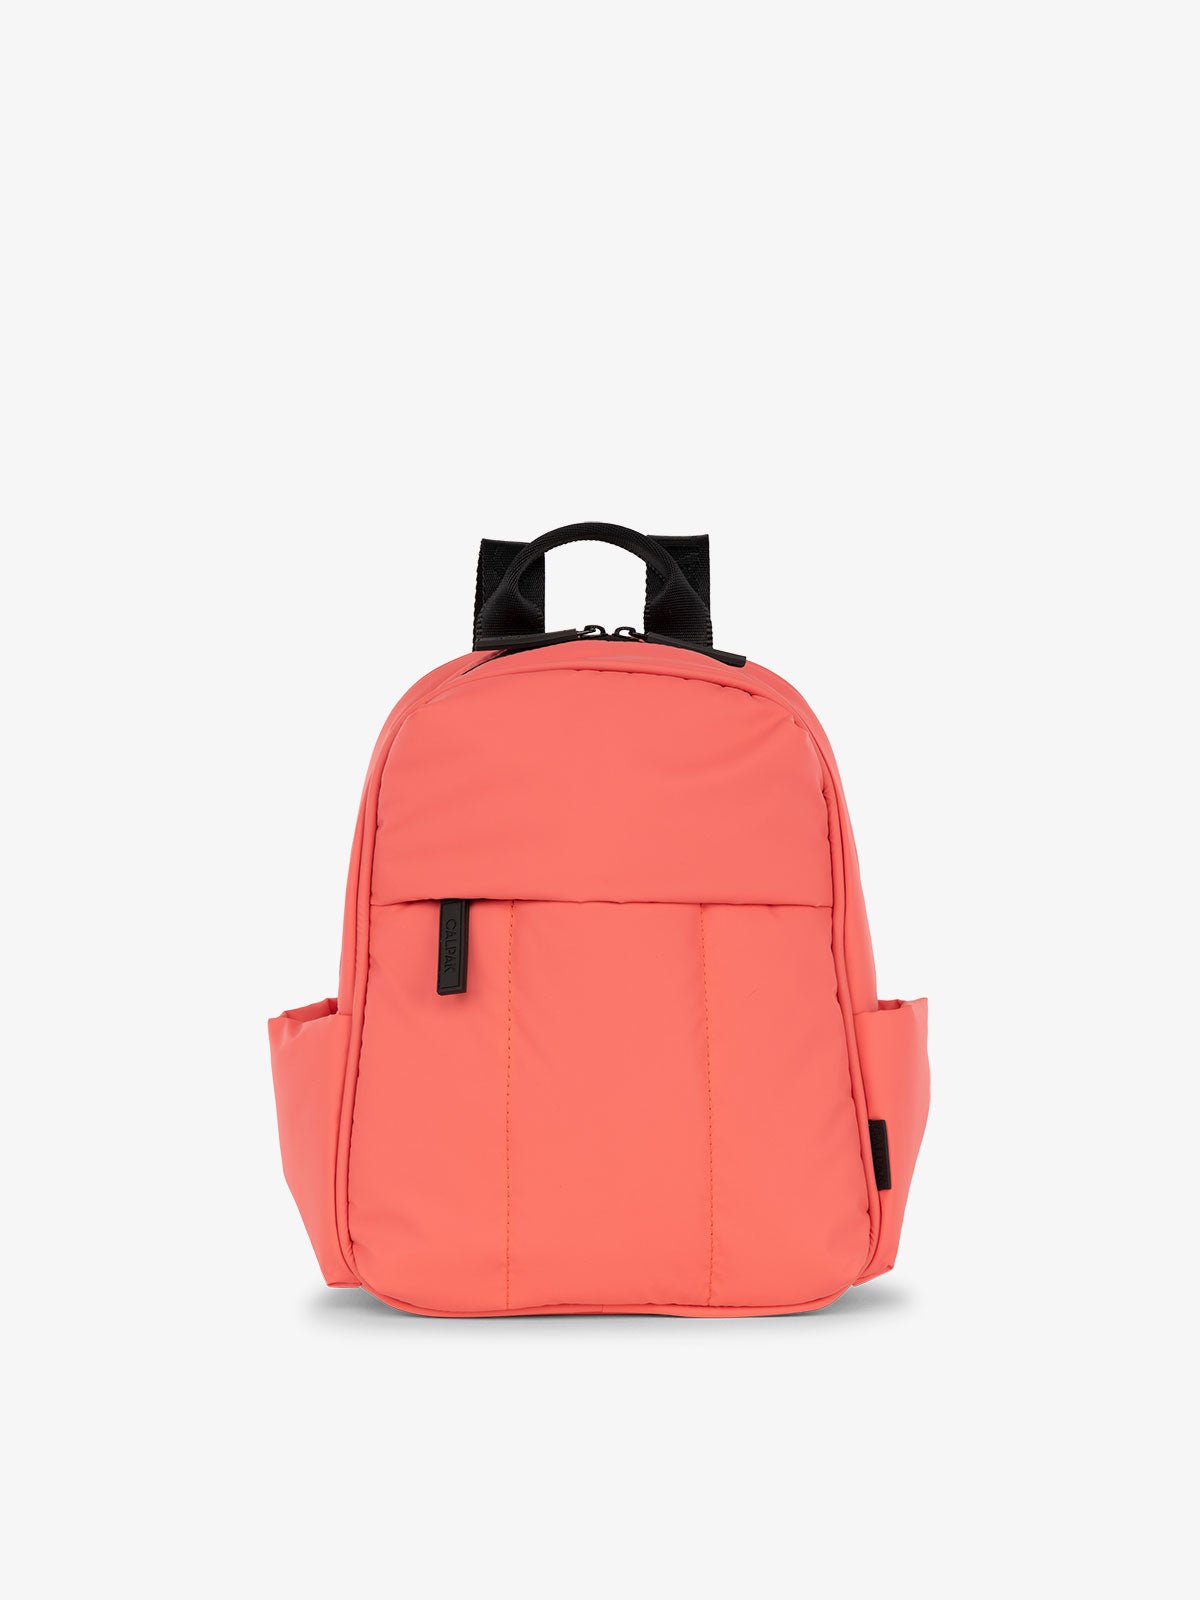 CALPAK Luka small Backpack for everyday in watermelon